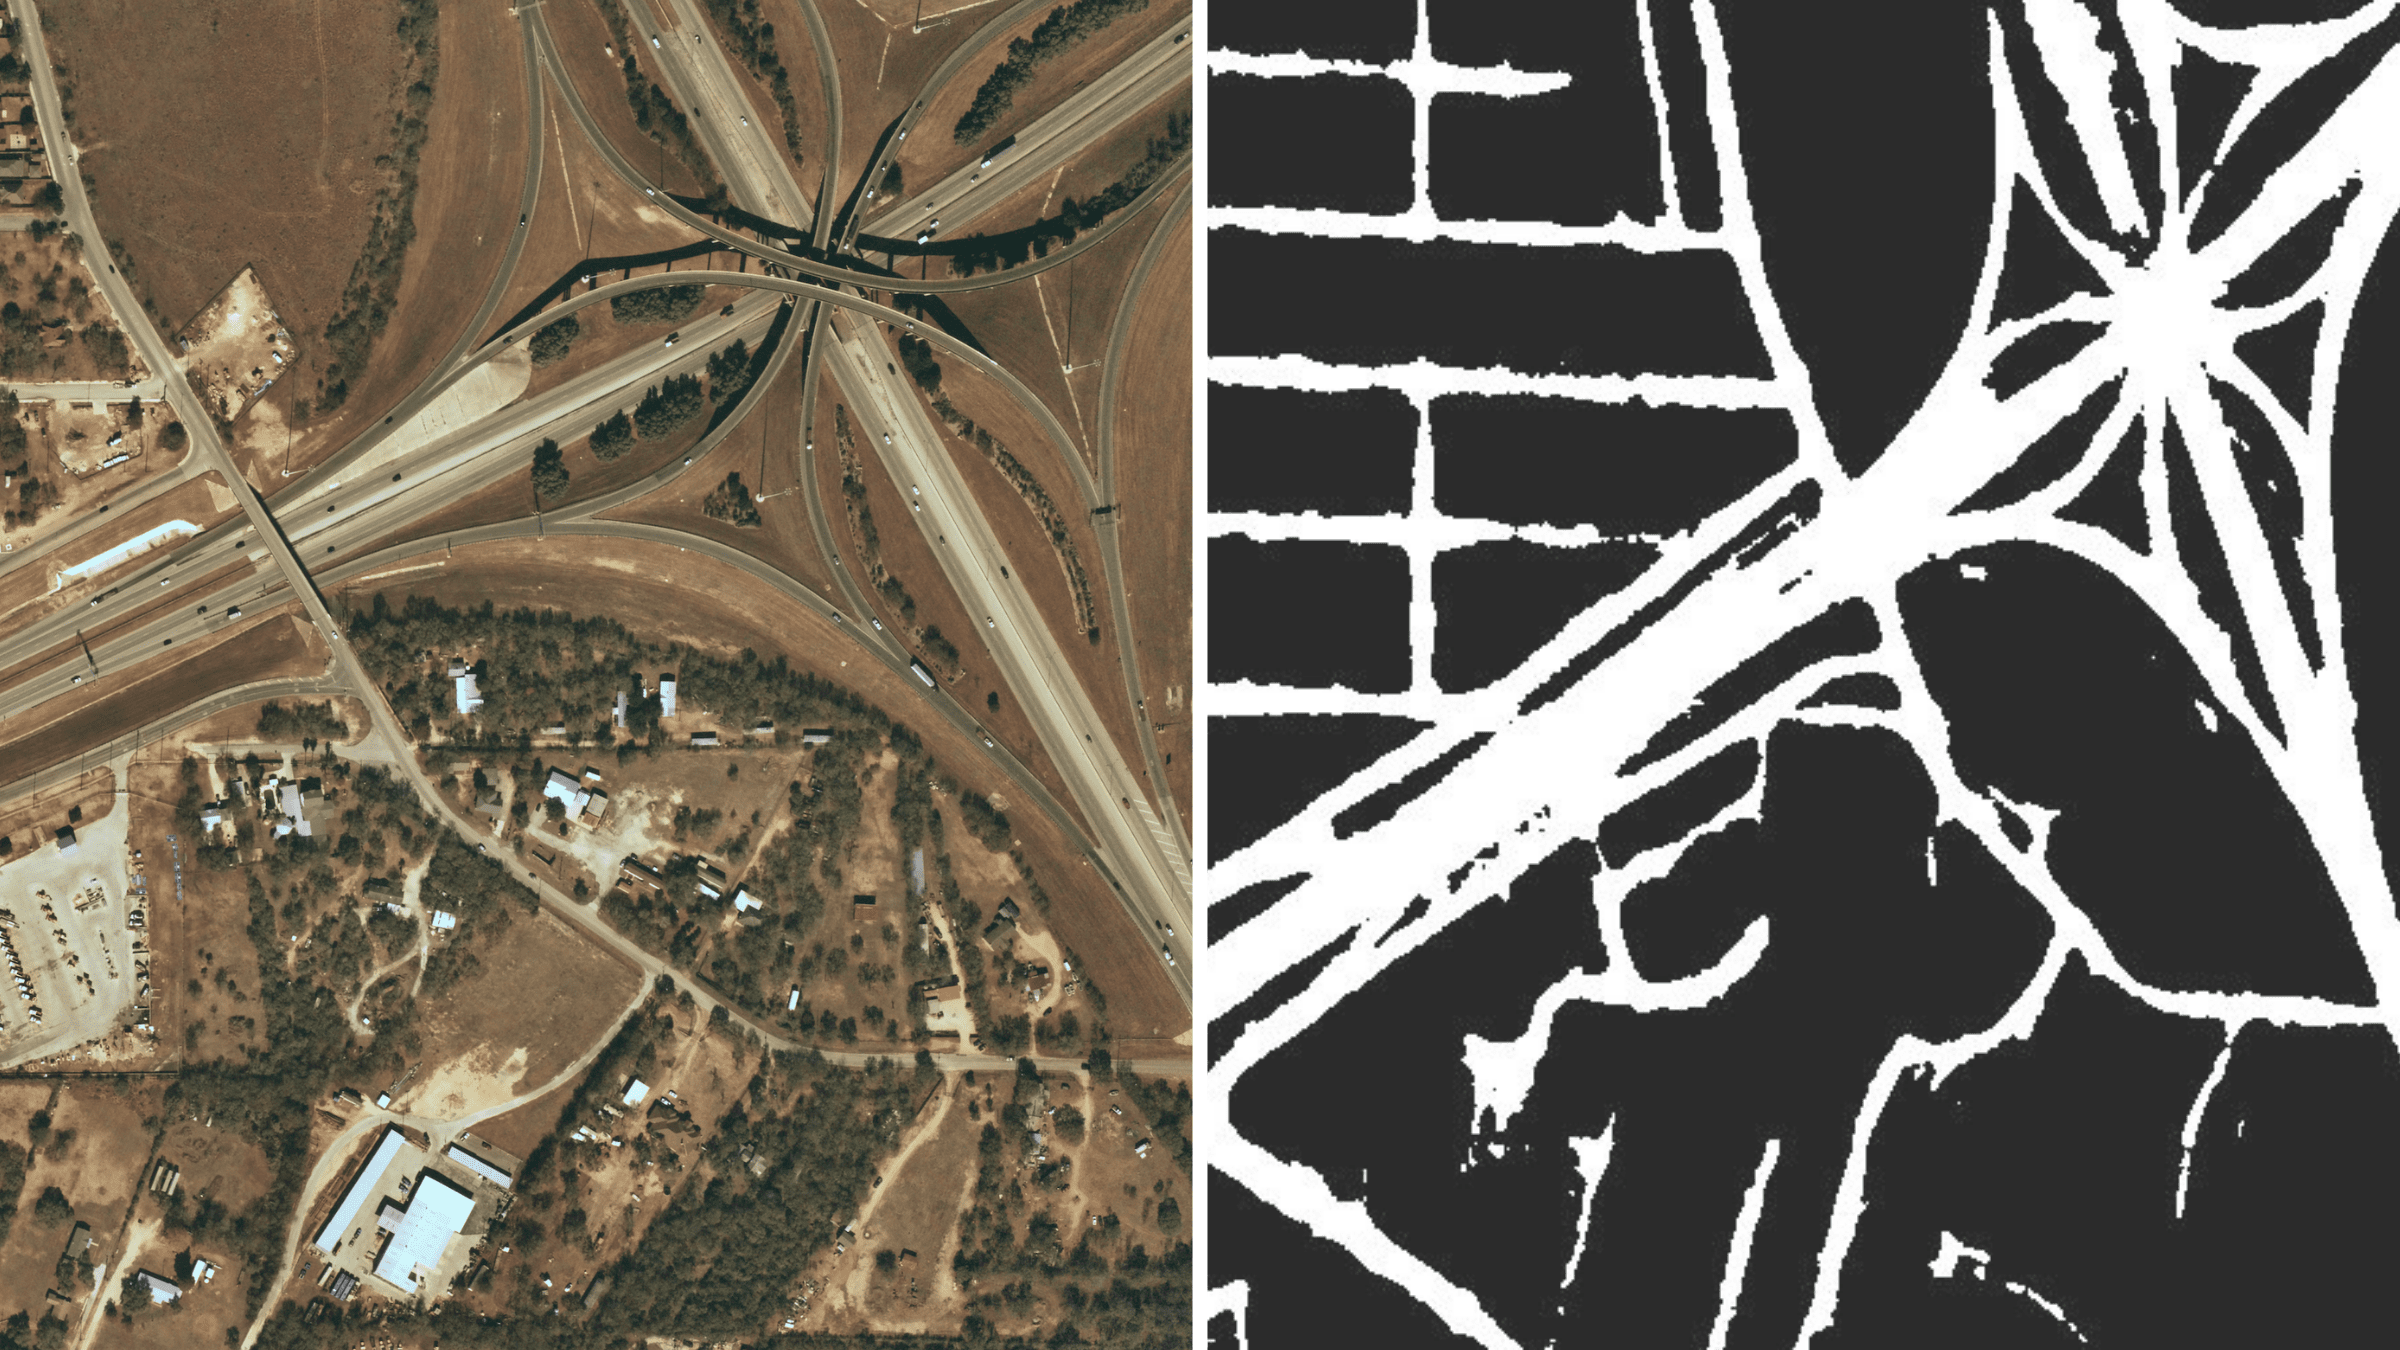 Near Space Labs image on left with respected binary road mask on right by Maria Alba from “A Novel Approach for Road Detection on Aerial Imagery.” 